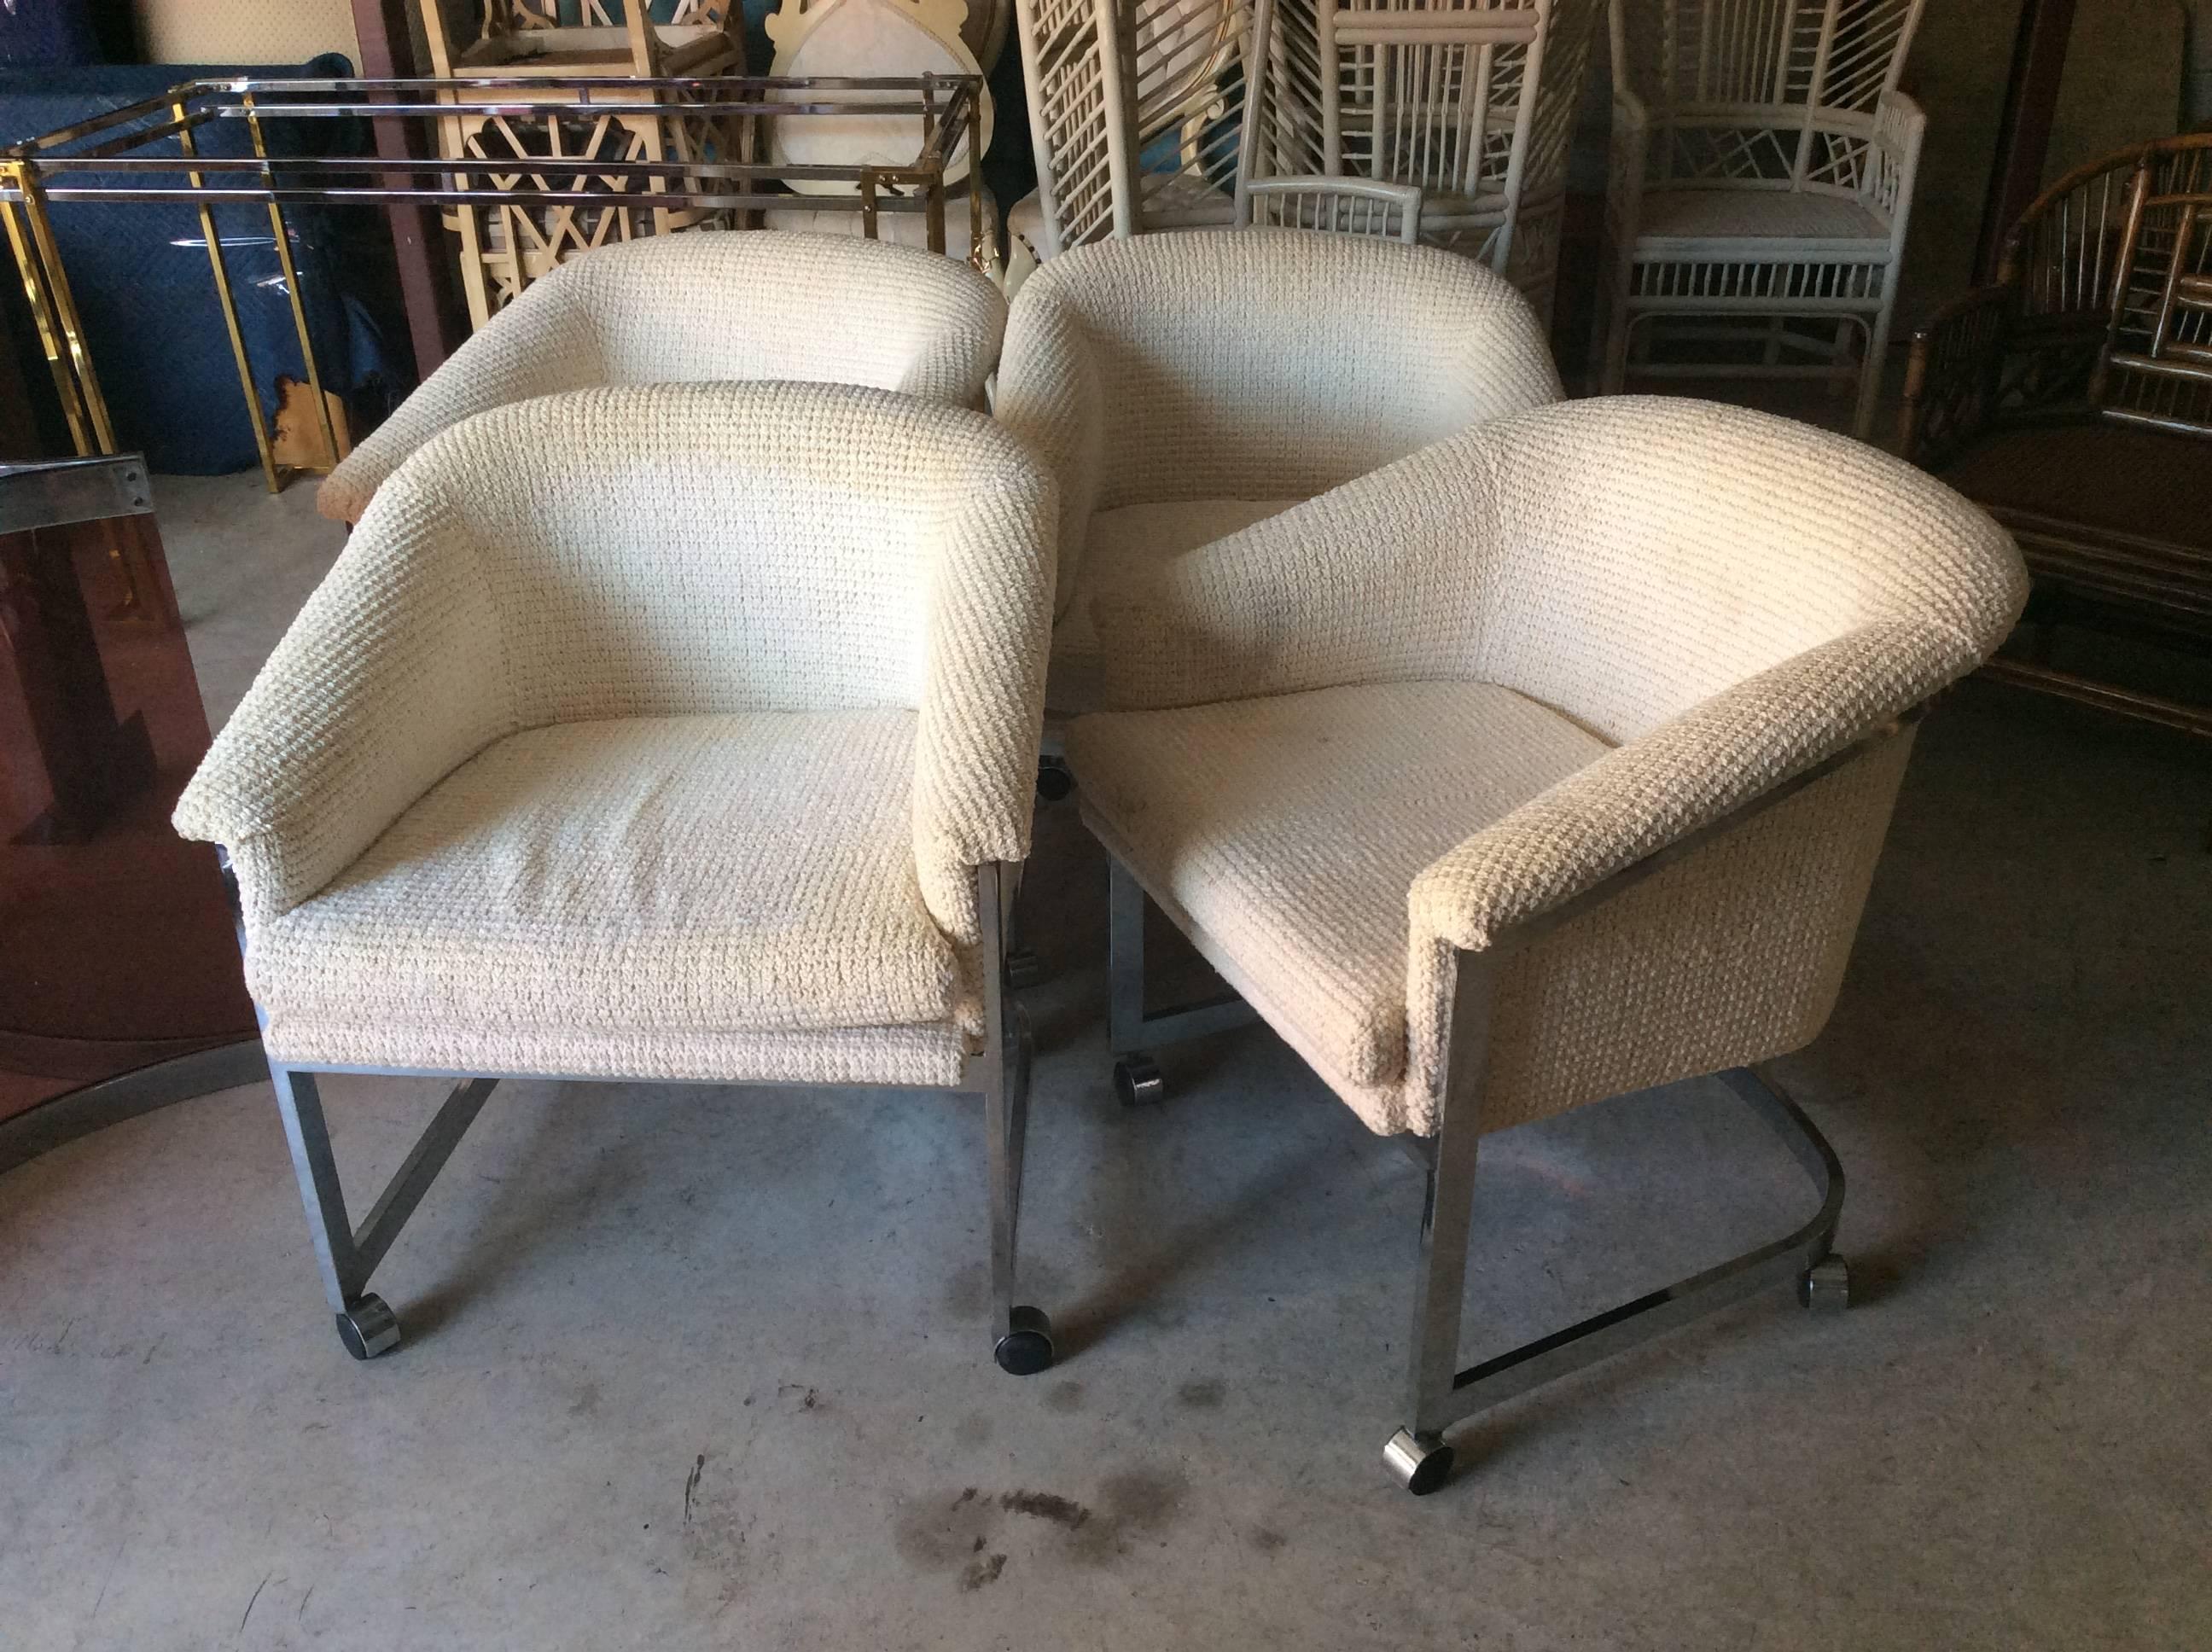 Set of four vintage Hollywood Palm Beach regency,  DIA Design Institute of America (tagged) by Milo Baughman chrome tub, barrel back armchairs with castors, wheels.  Can be used as dining chairs, desk or office chairs.
Original nubby wool fabric has